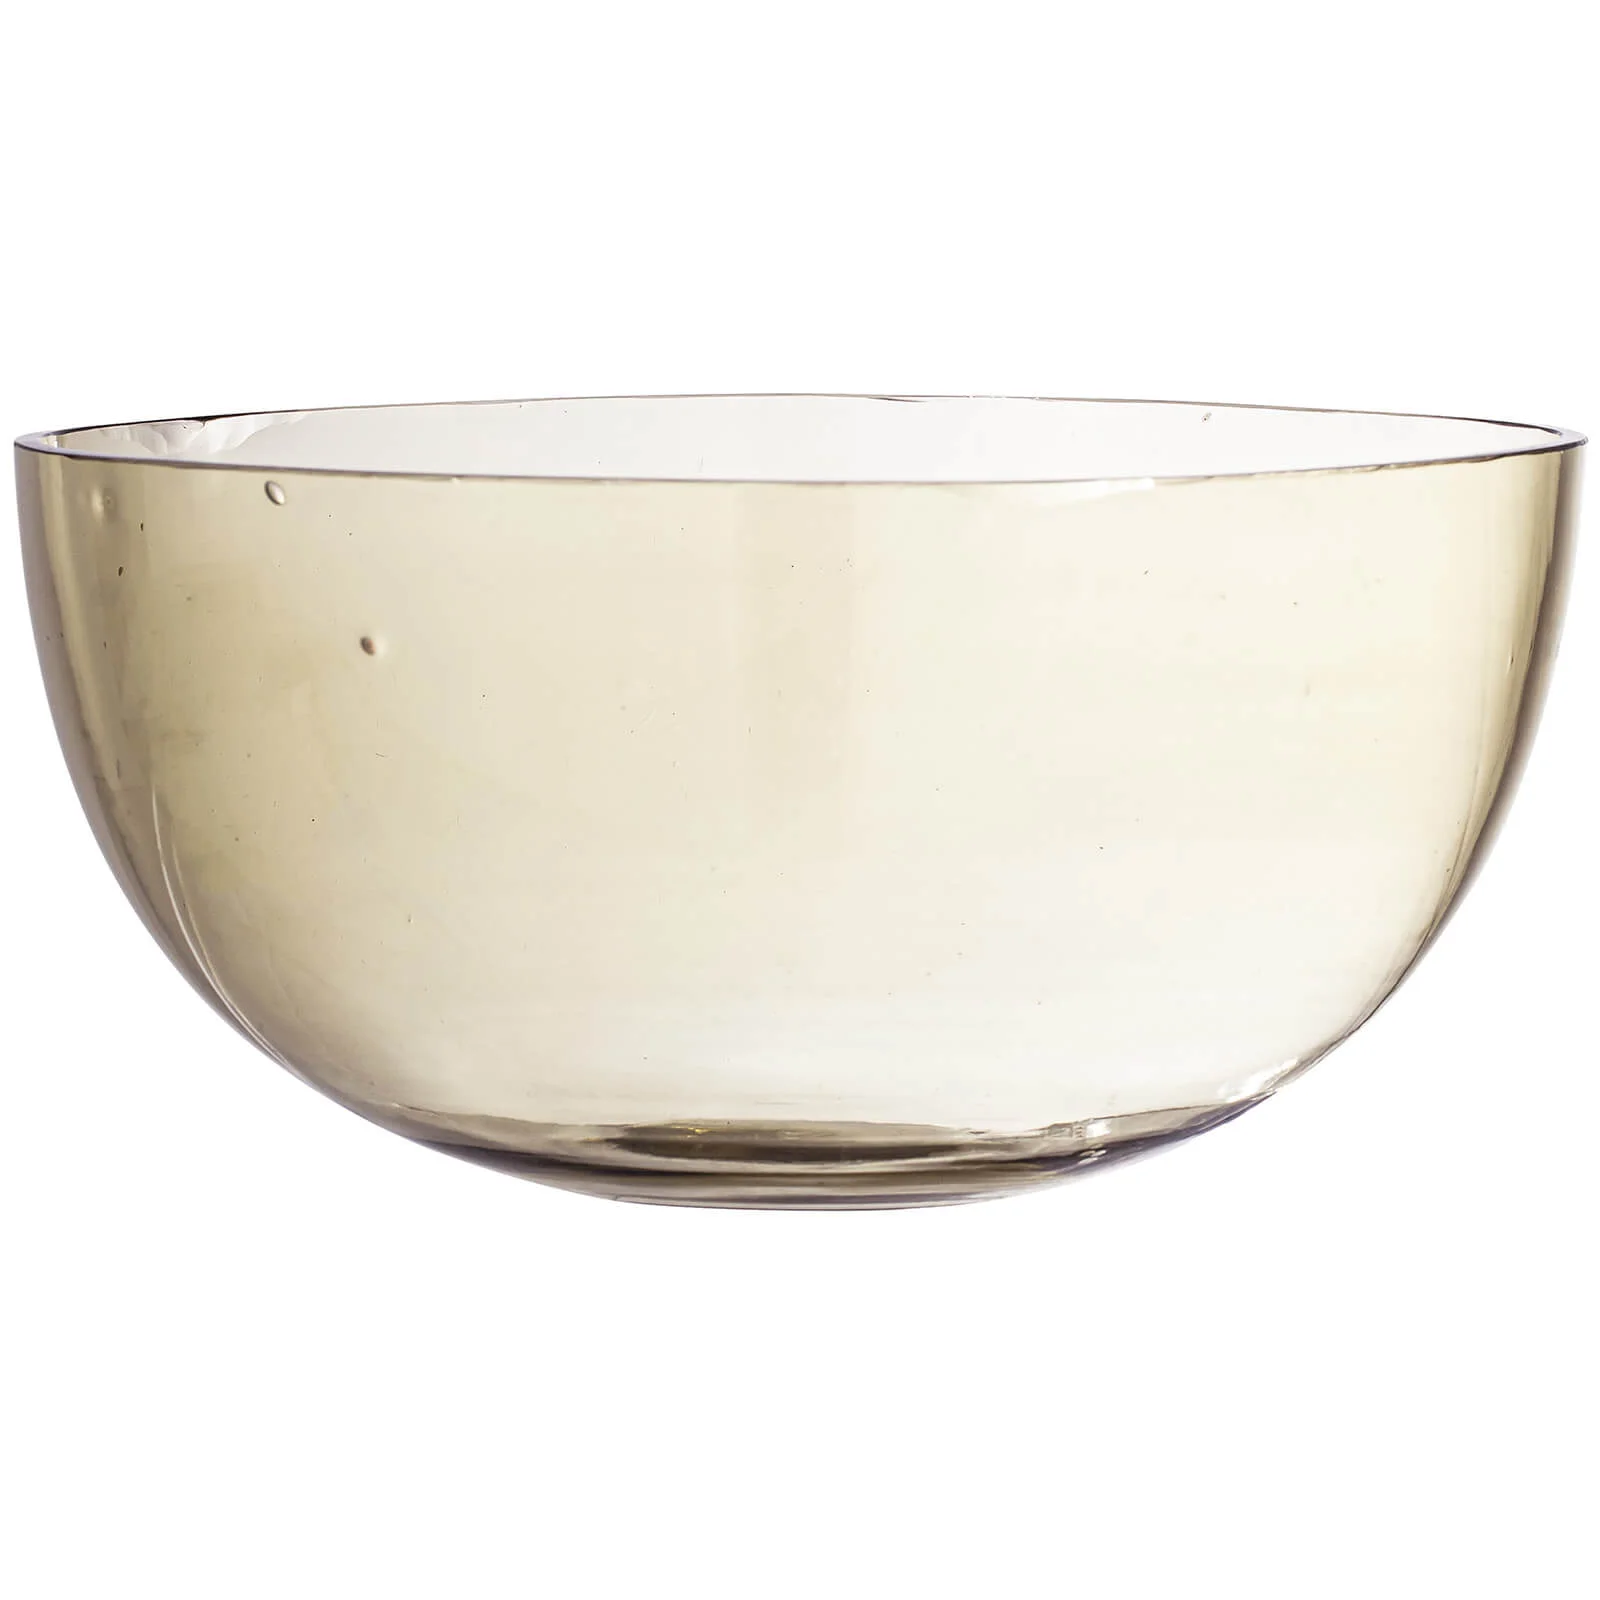 Bloomingville Recycled Glass Casie Bowl - Large - Brown Image 1